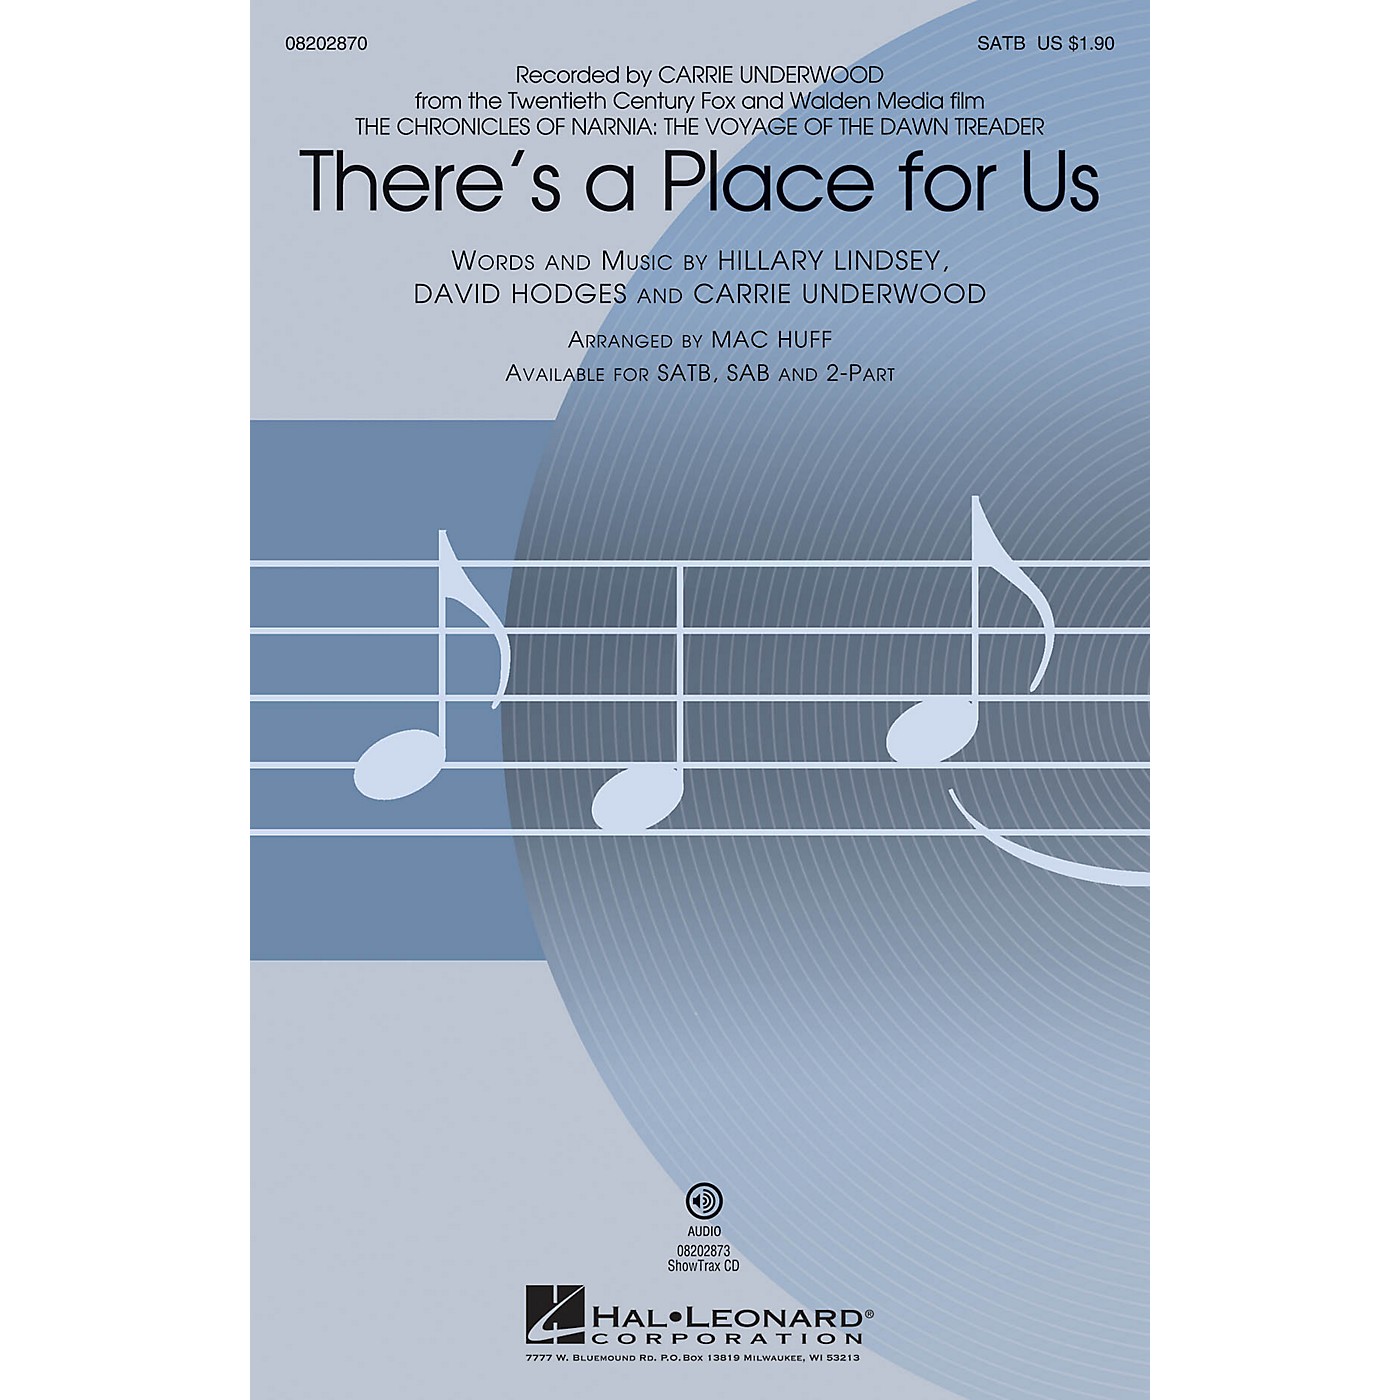 Hal Leonard There's a Place for Us (from The Chronicles of Narnia) SATB by Carrie Underwood arranged by Mac Huff thumbnail